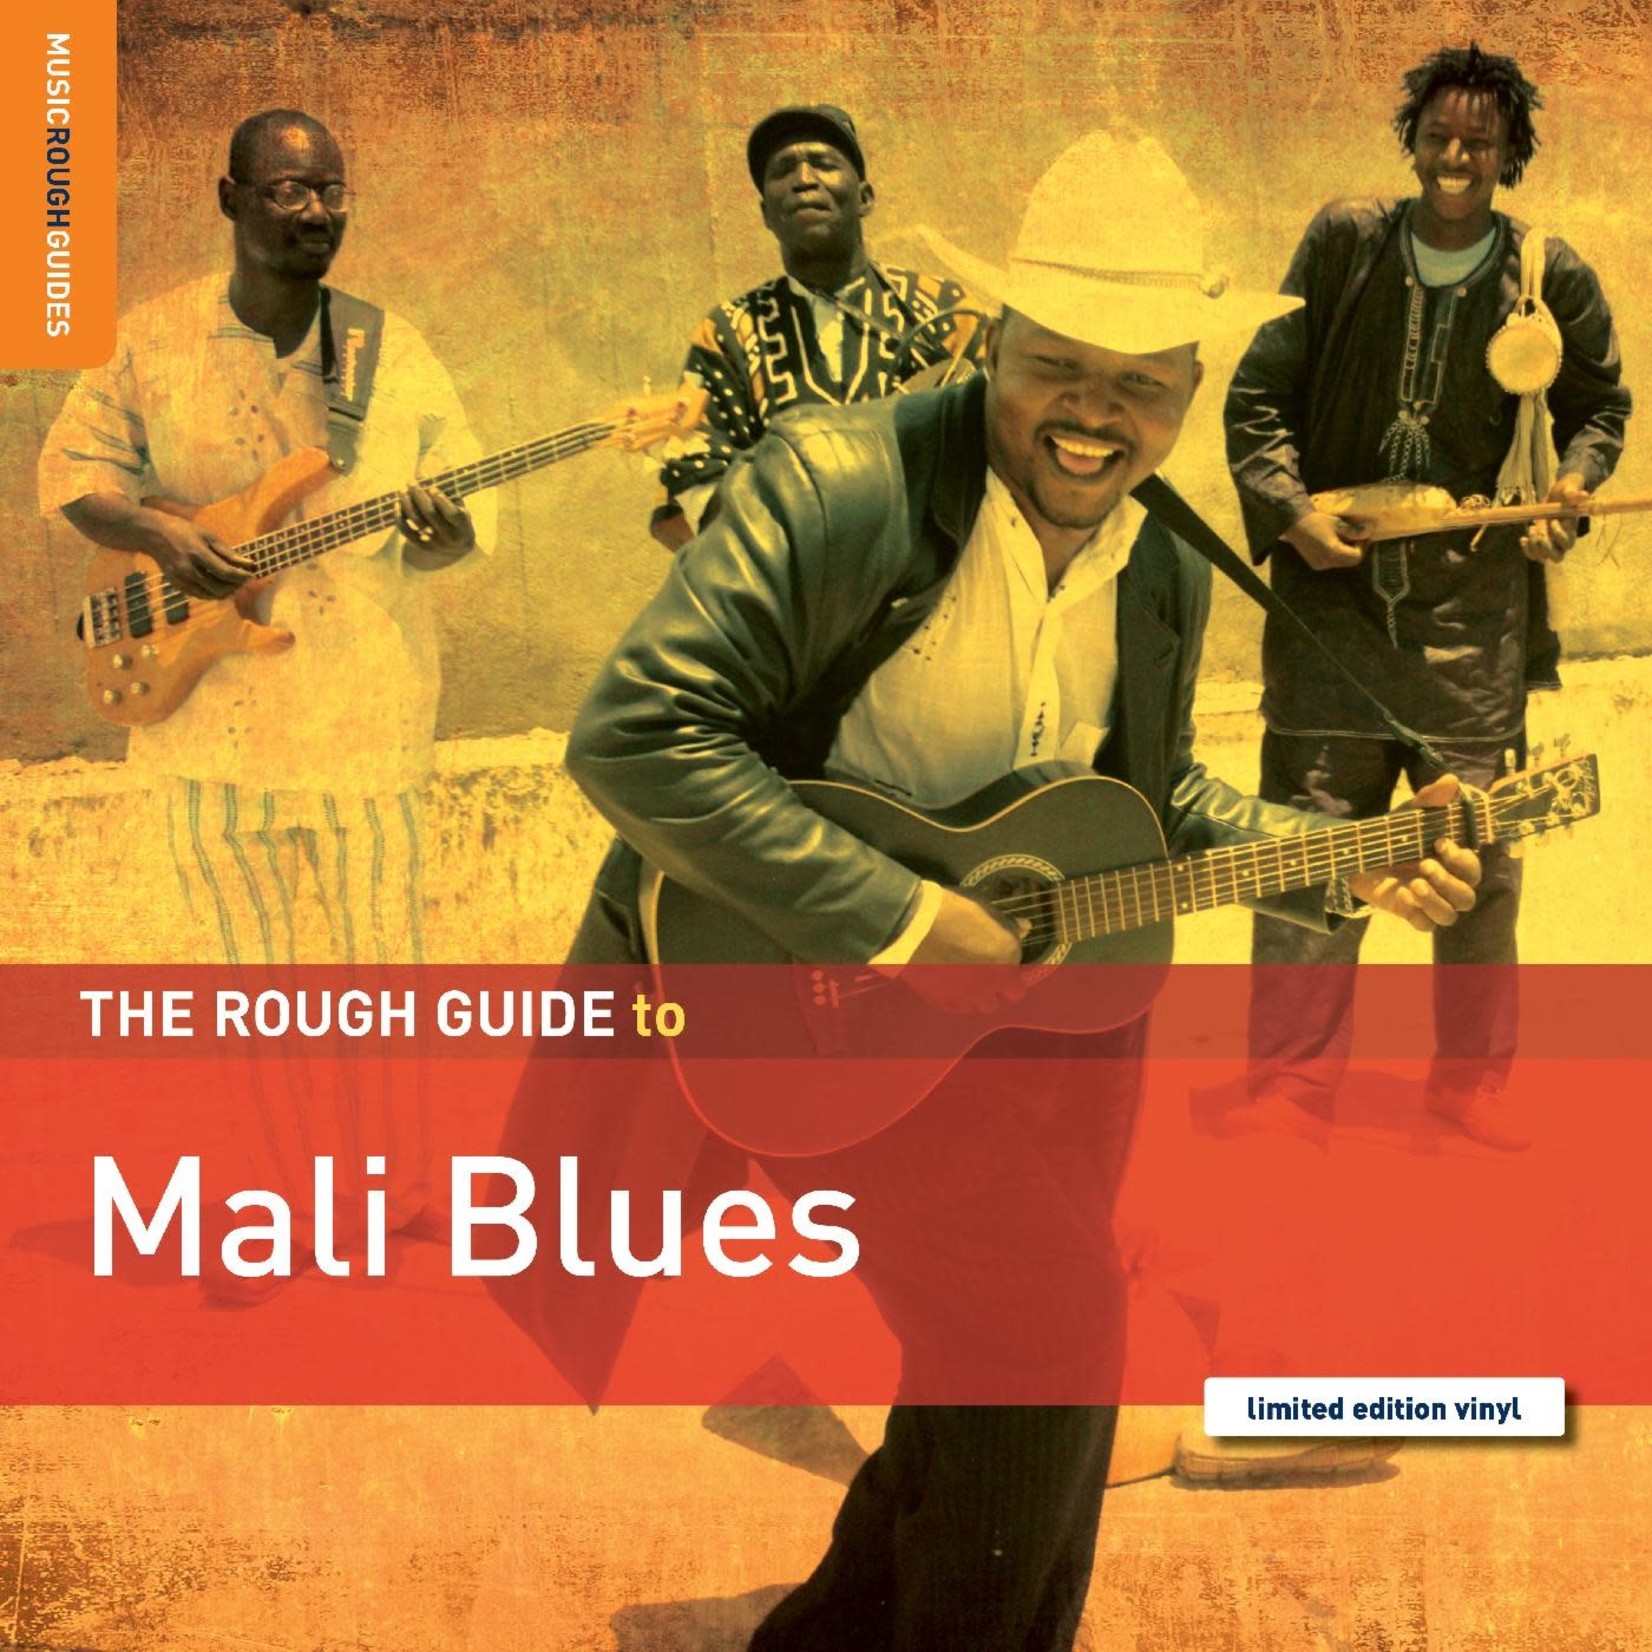 Rough Guide V/A - The Rough Guide to Mali Blues (LP)